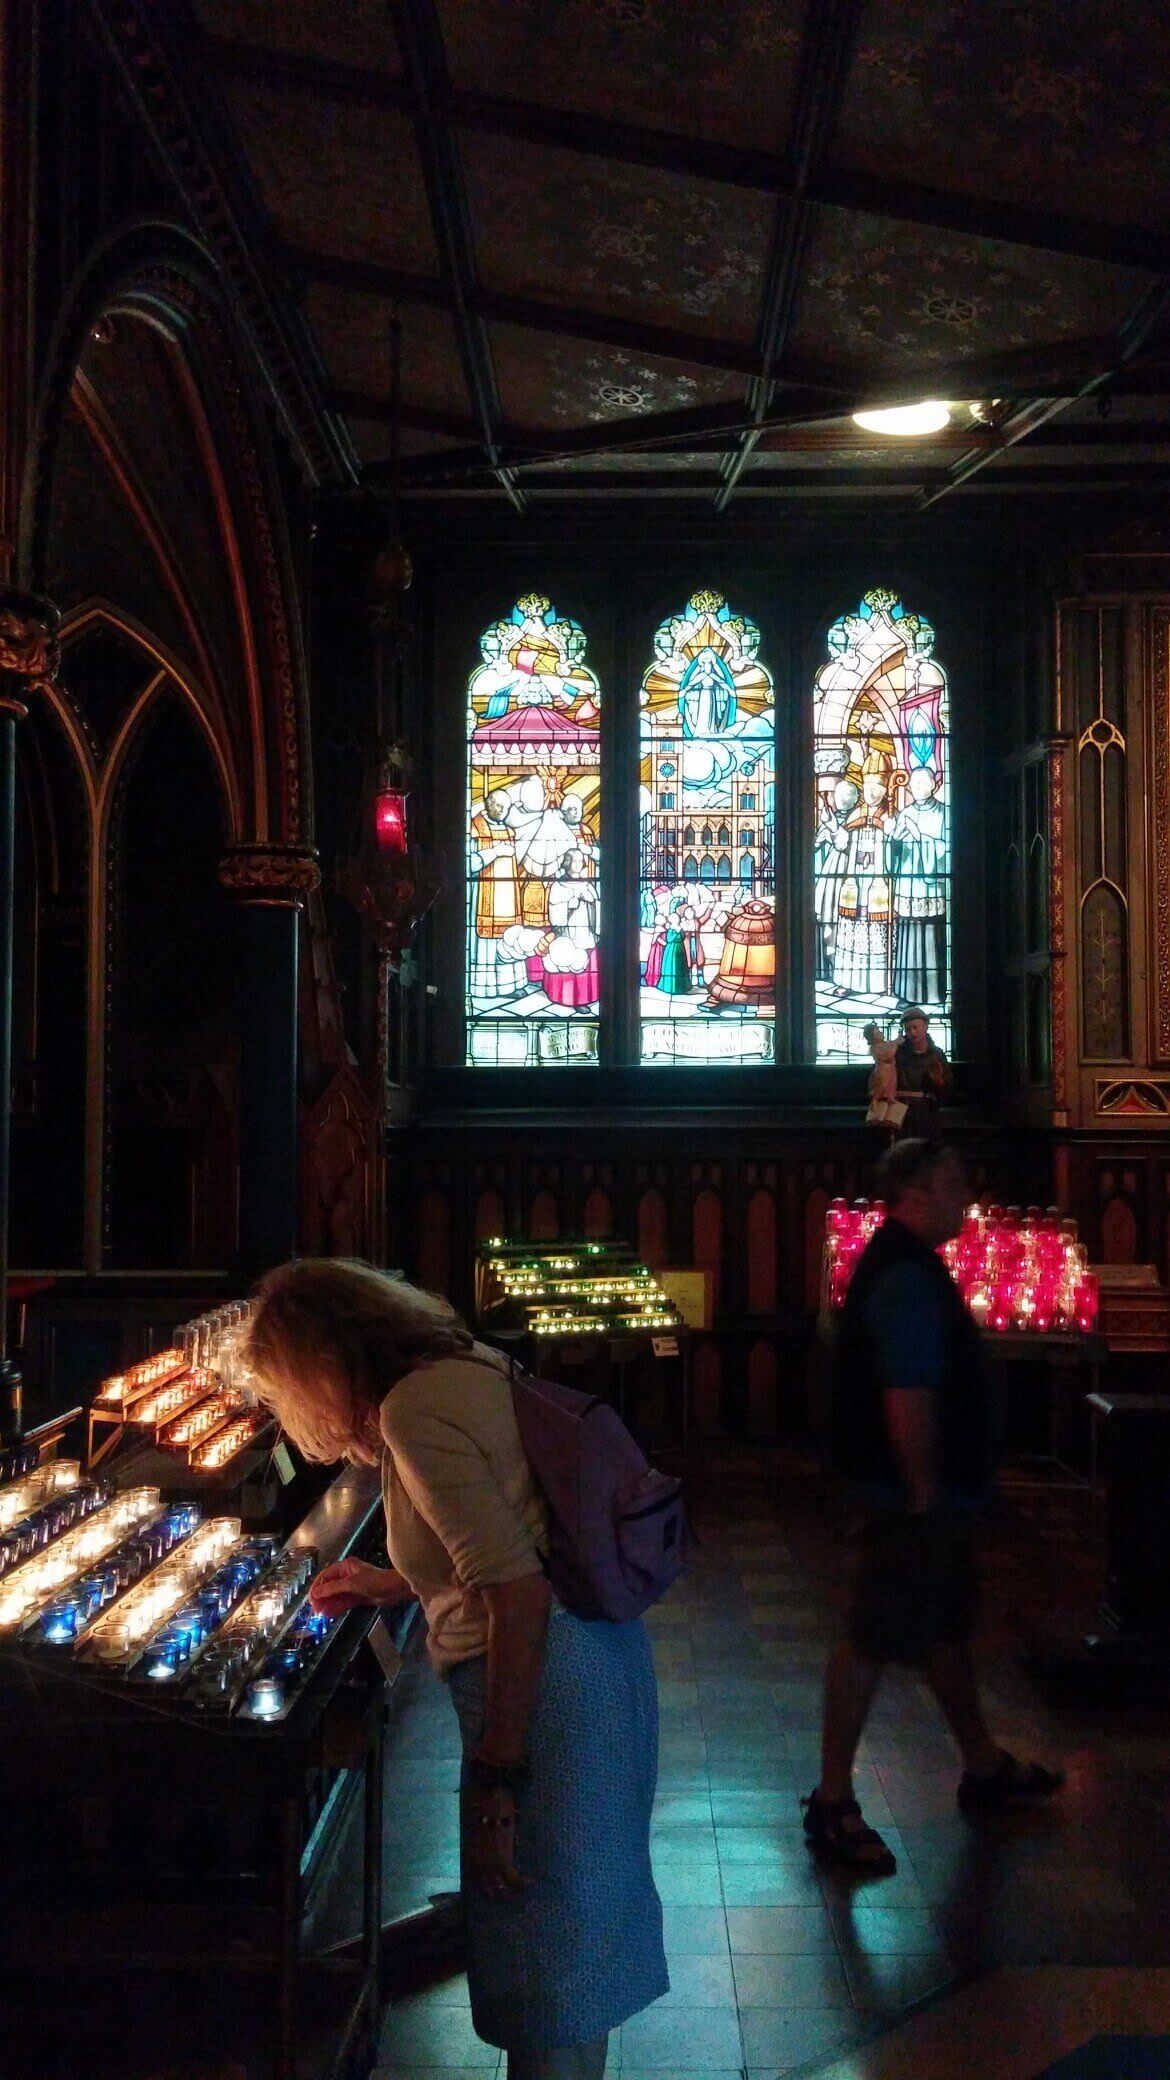 Notably, the stained glass in the cathedral does not depict scenes from the bible, rather it shows scenes from Montreal's history.